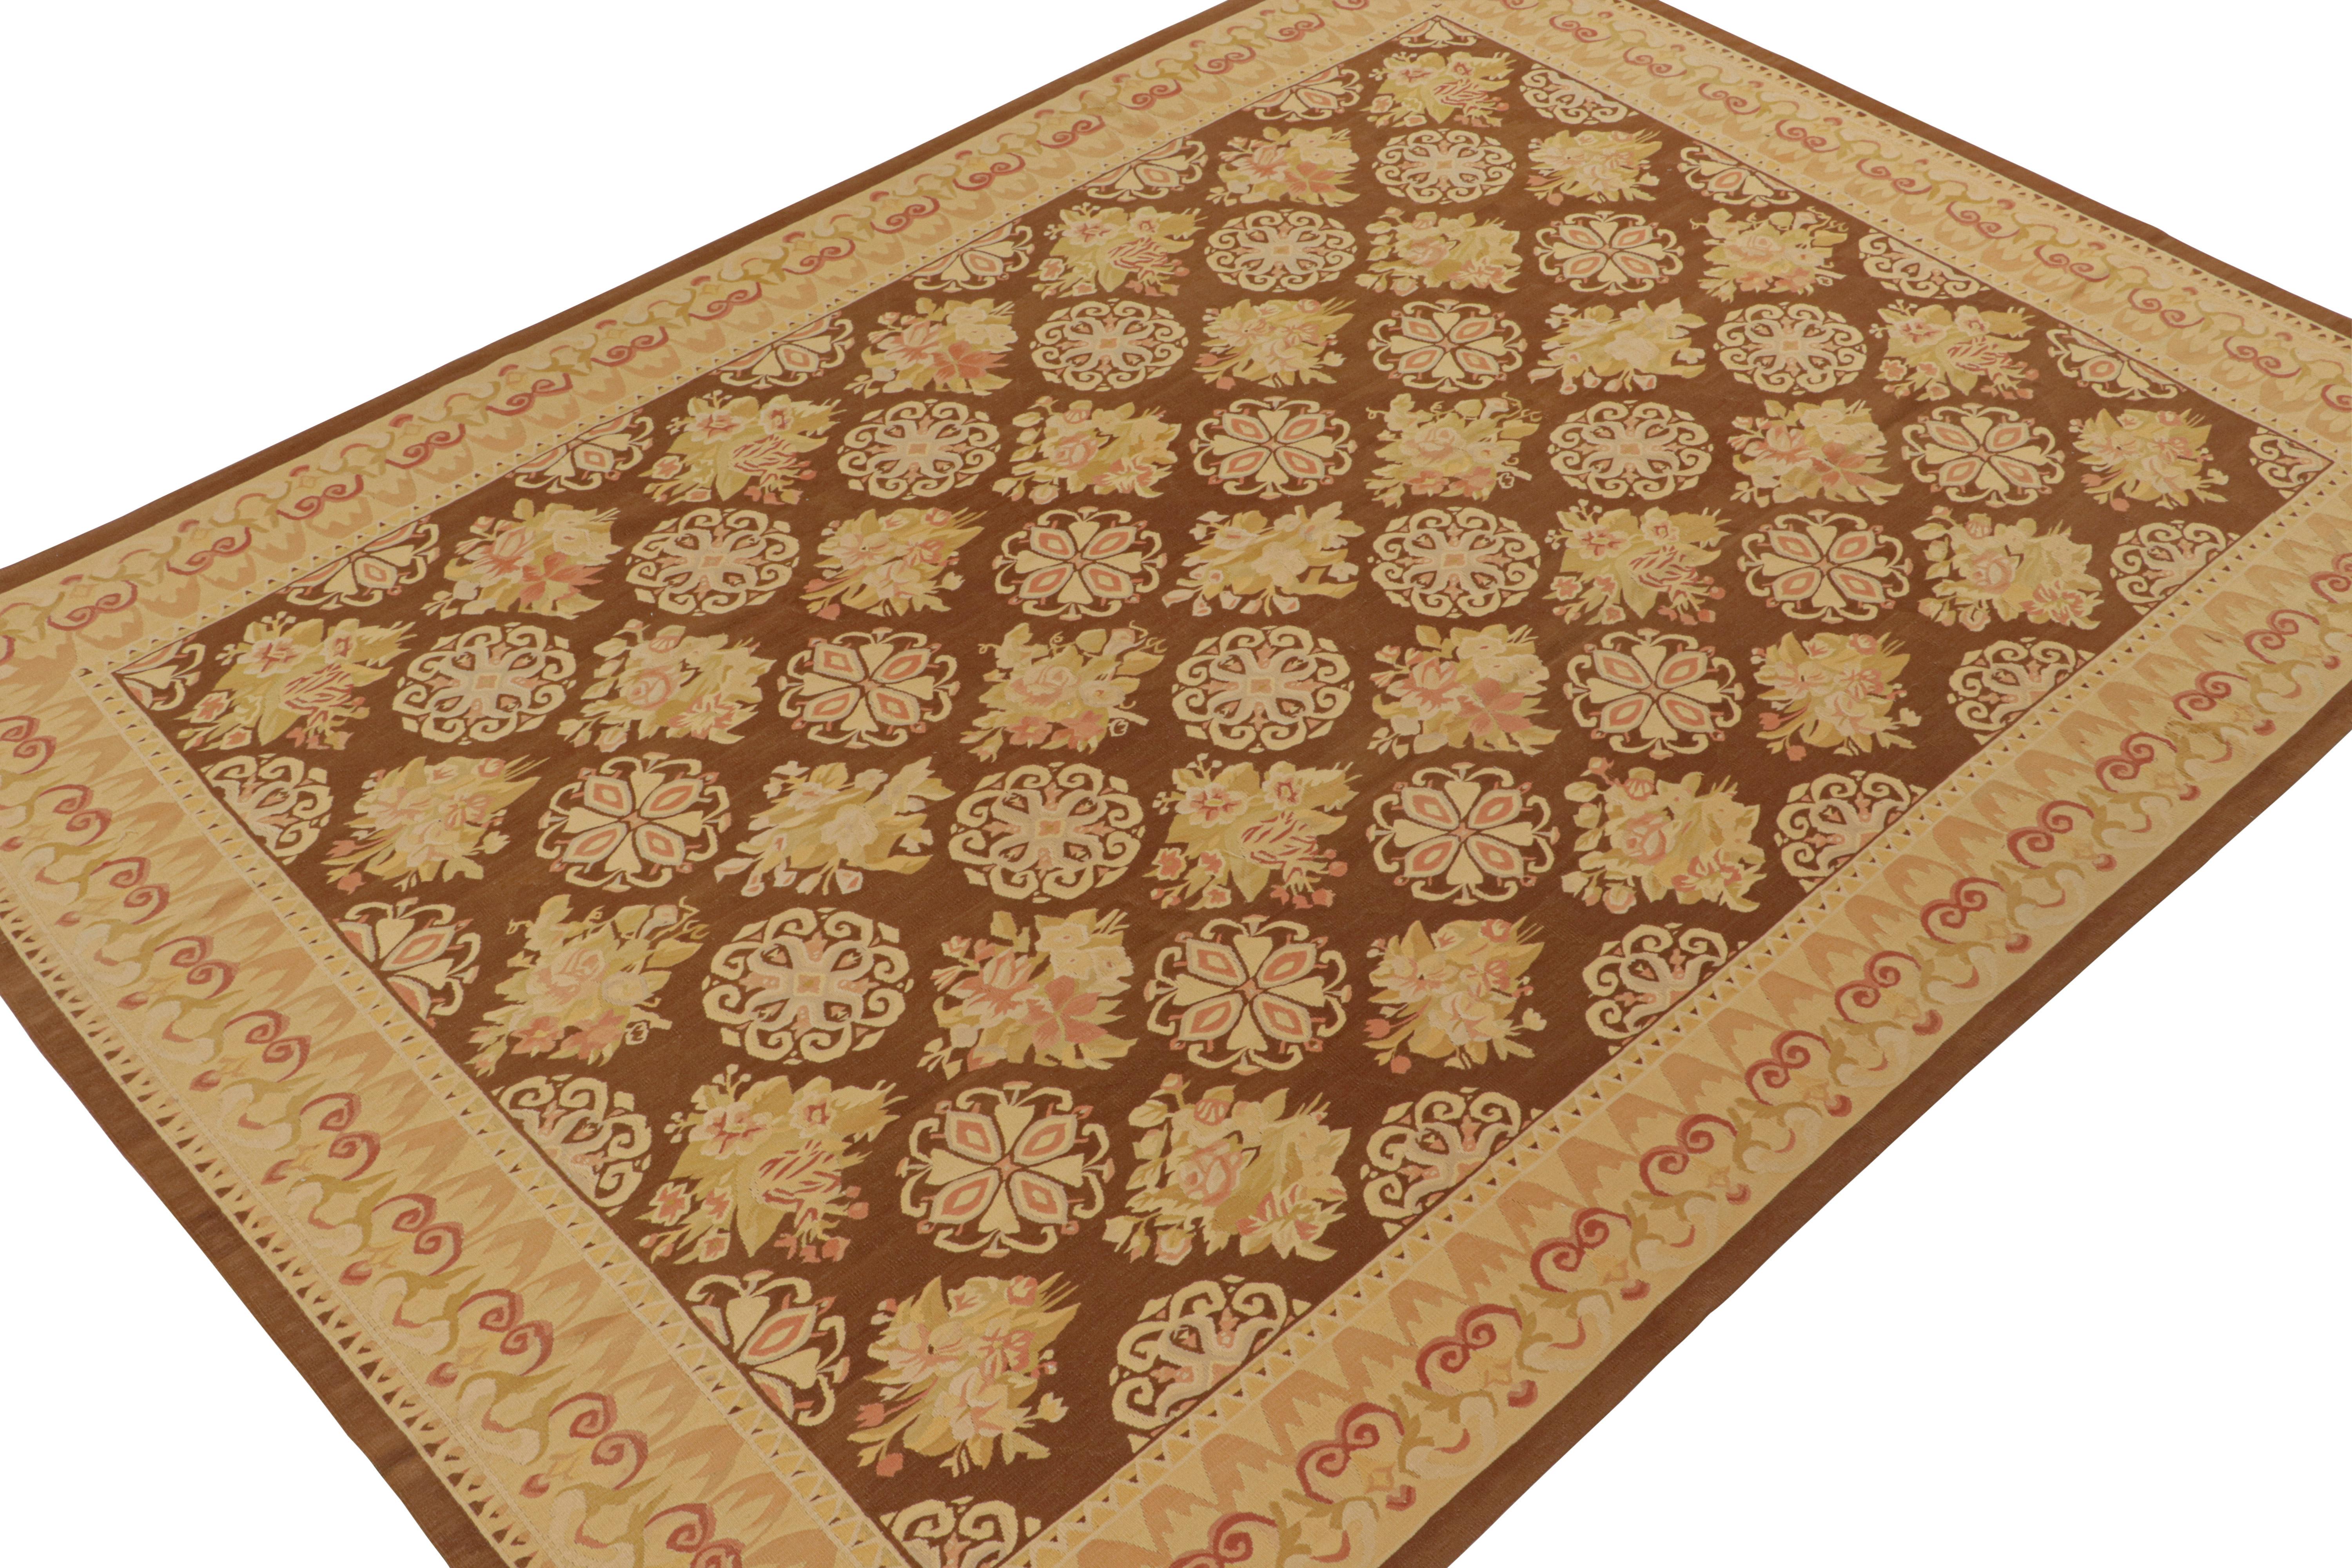 Hand-Knotted Rug & Kilim’s Aubusson Flatweave Style Rug in Brown with Beige Floral Patterns For Sale